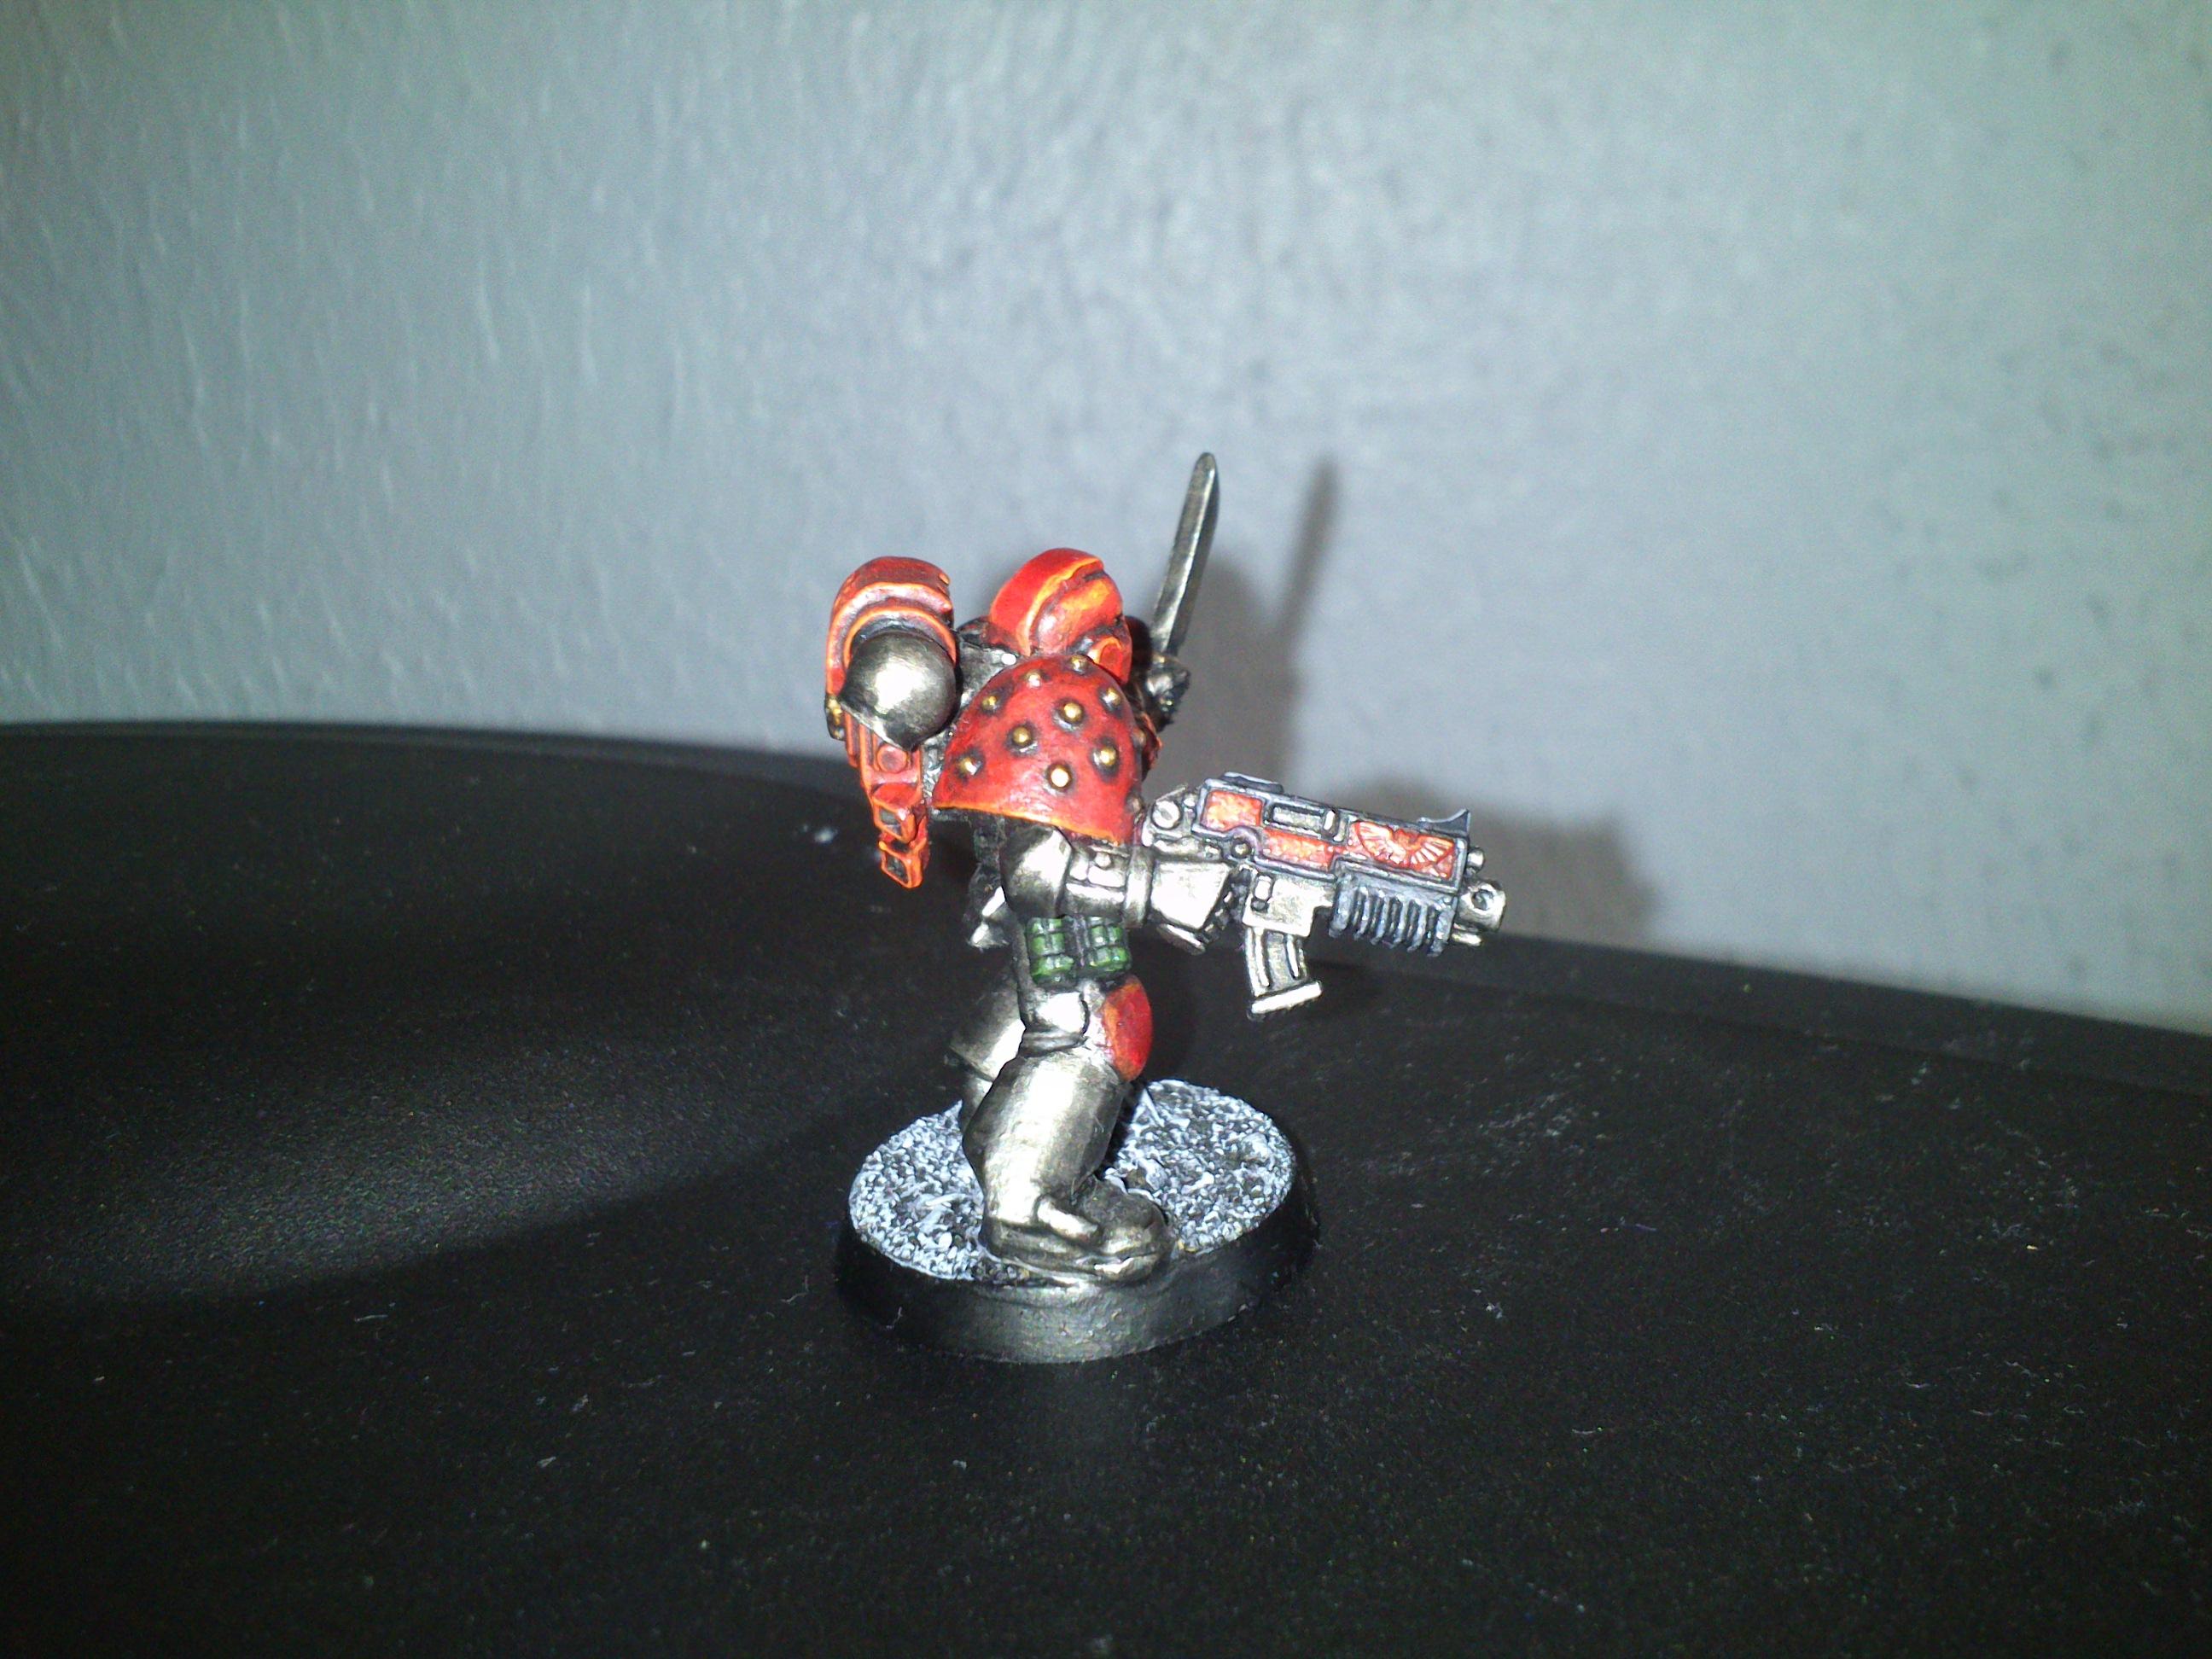 Knights of blood conversion side view